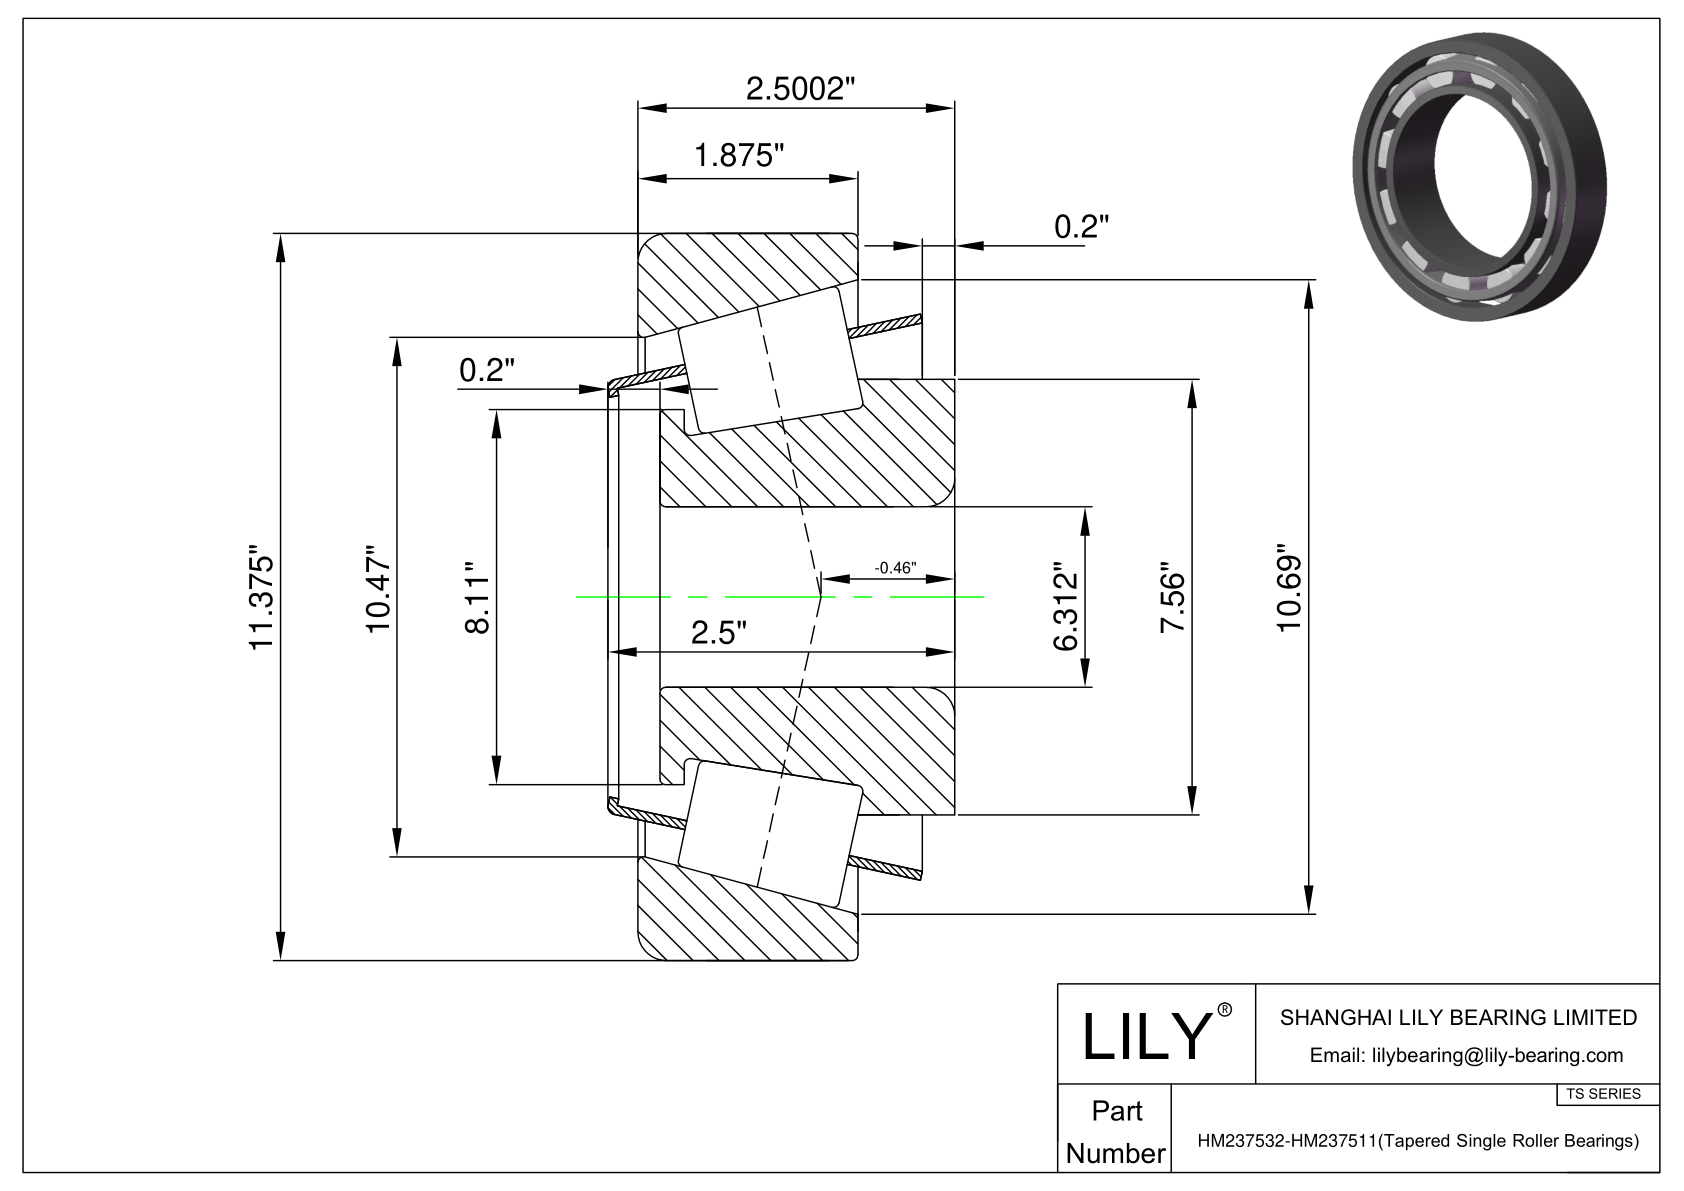 HM237532-HM237511 TS (Tapered Single Roller Bearings) (Imperial) cad drawing